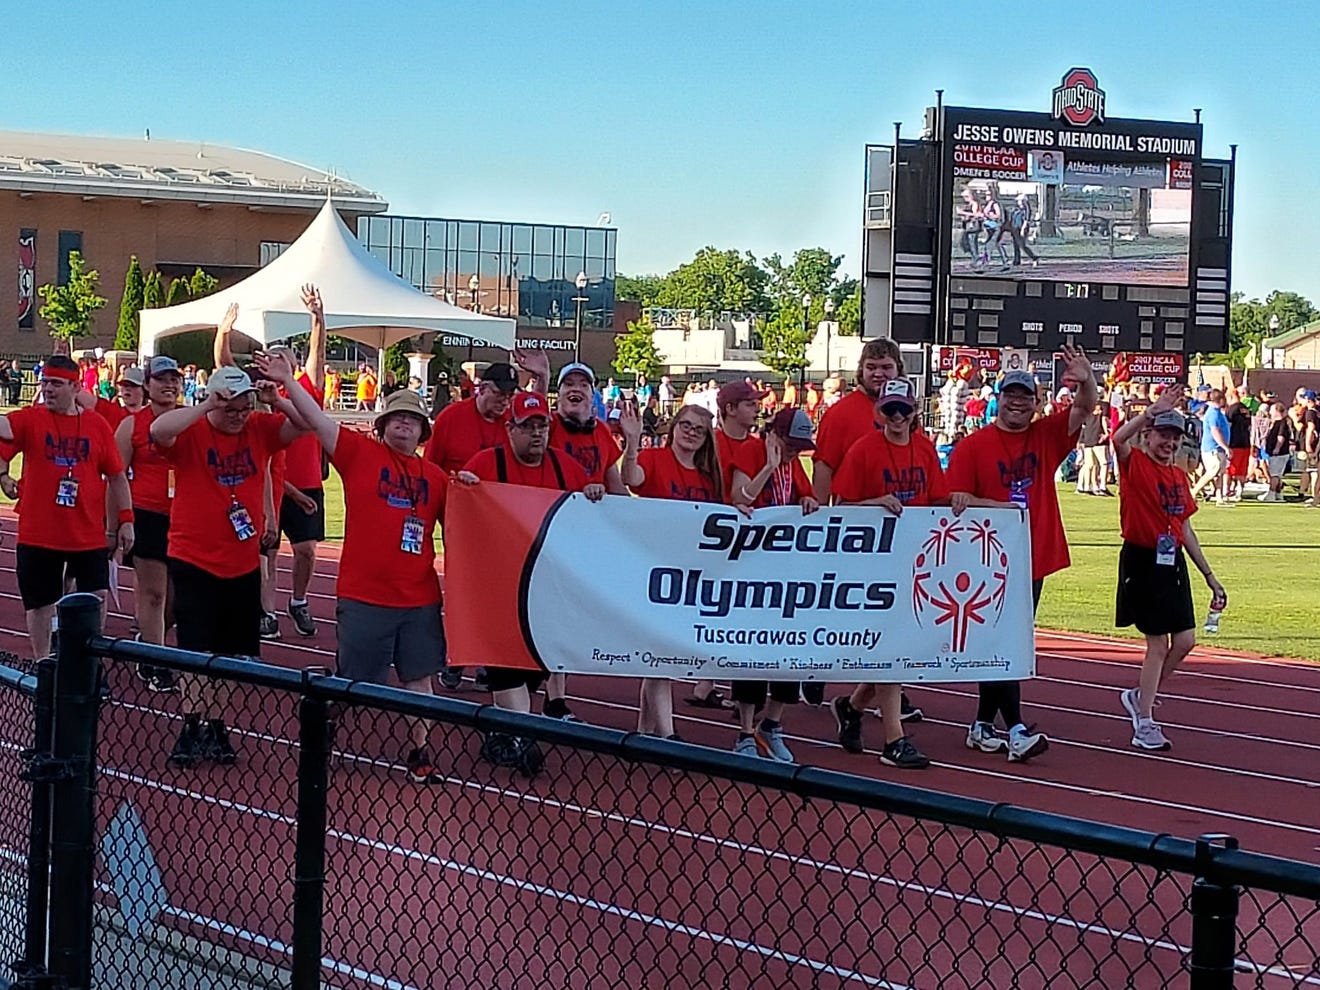 Tuscarawas Co. Rockets compete in Special Olympics Ohio Summer Games